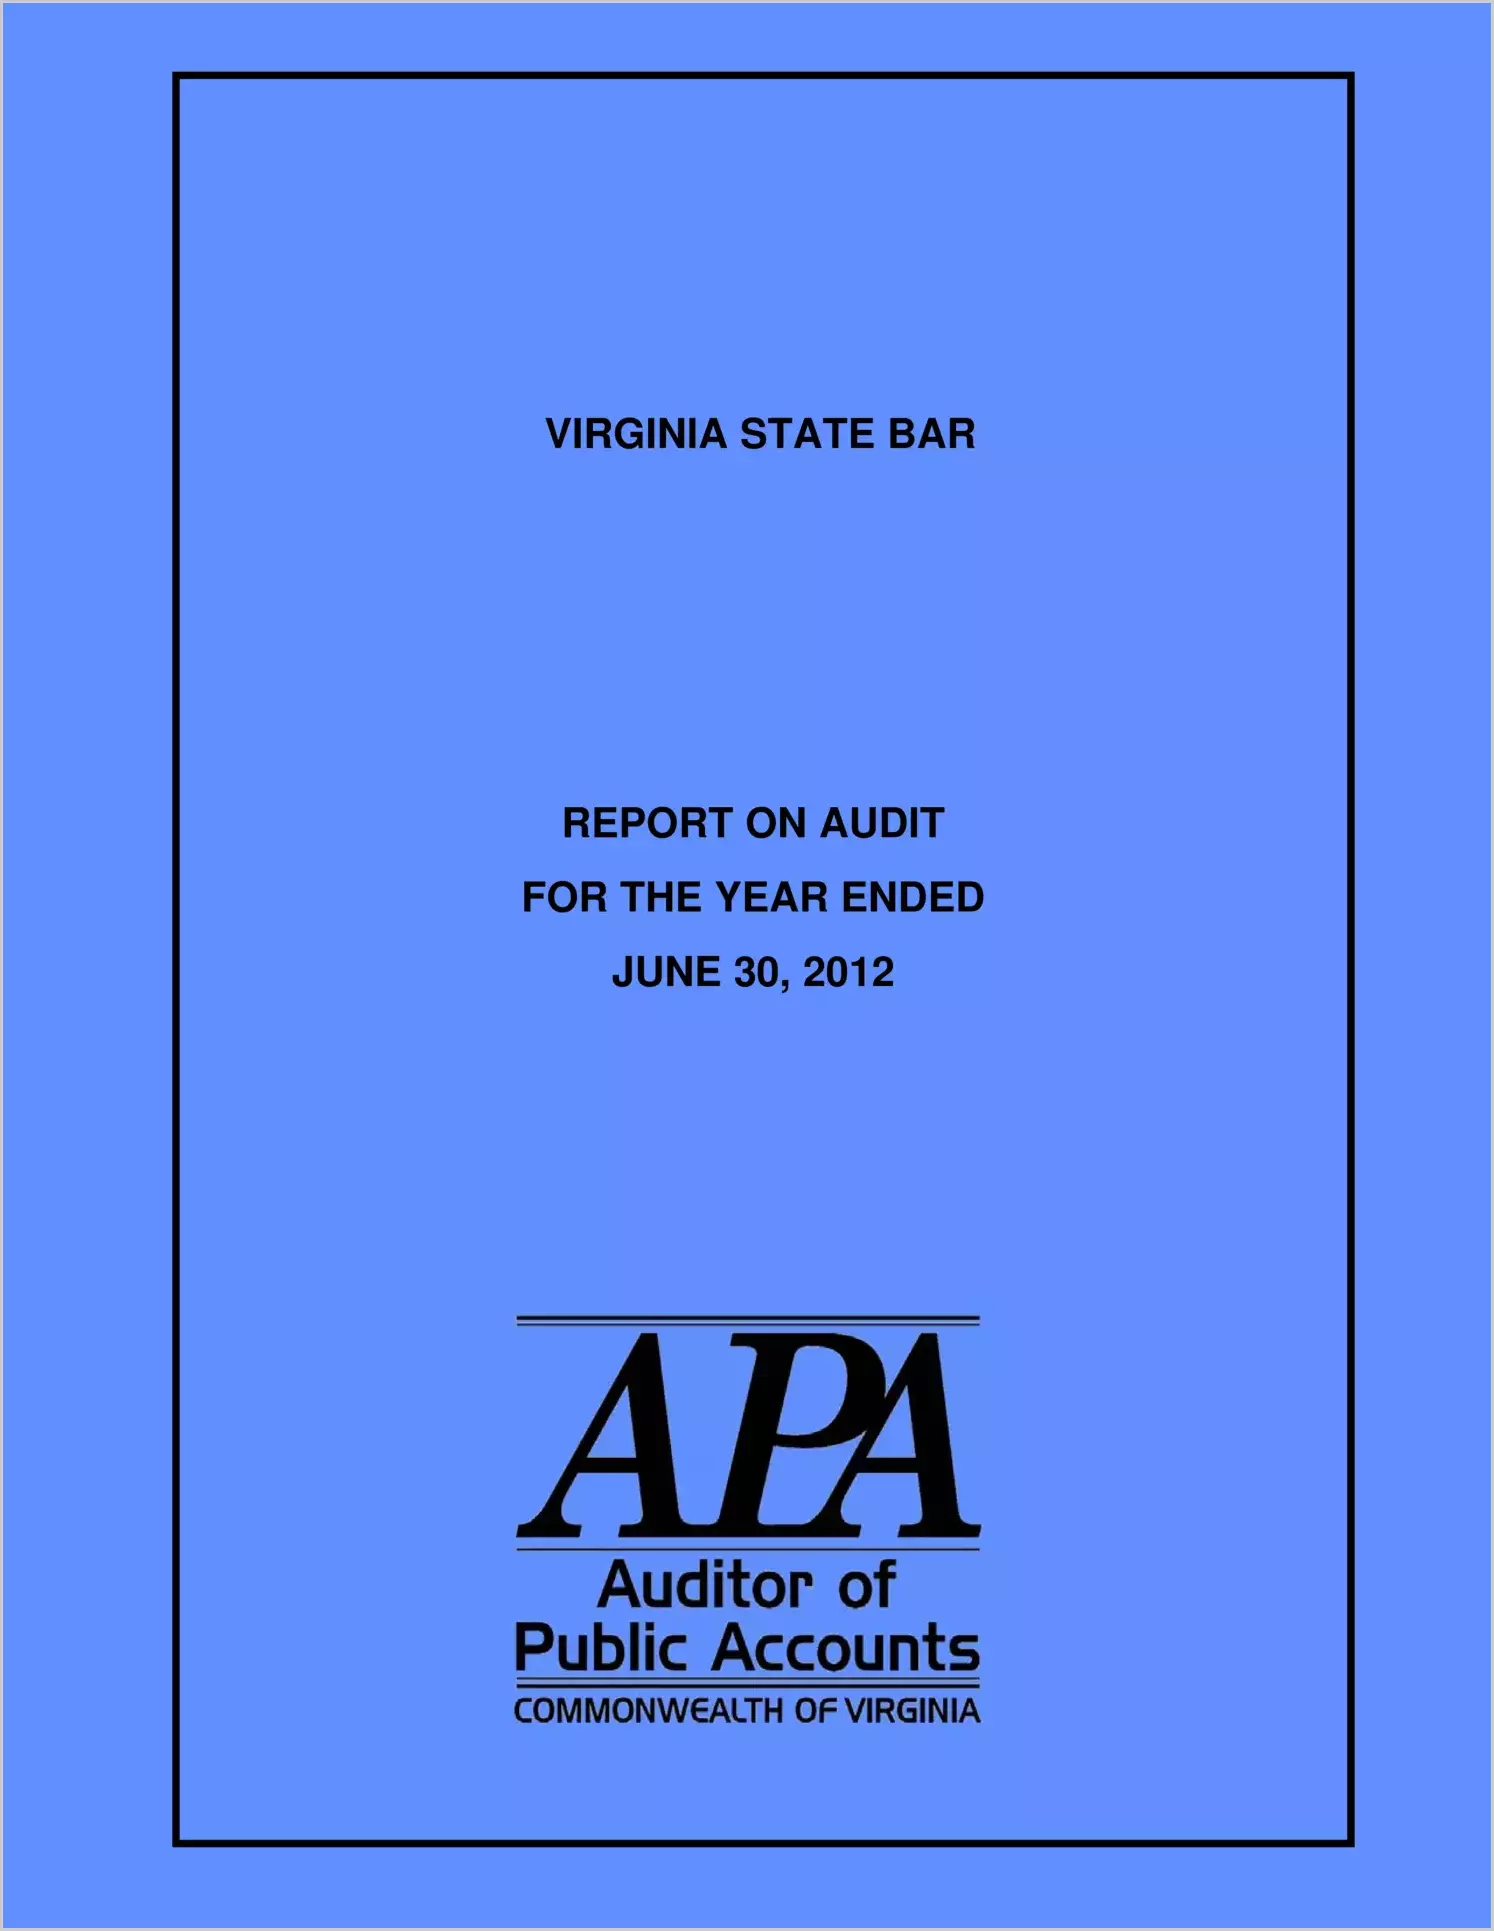 Virginia State Bar for the year ended June 30, 2012